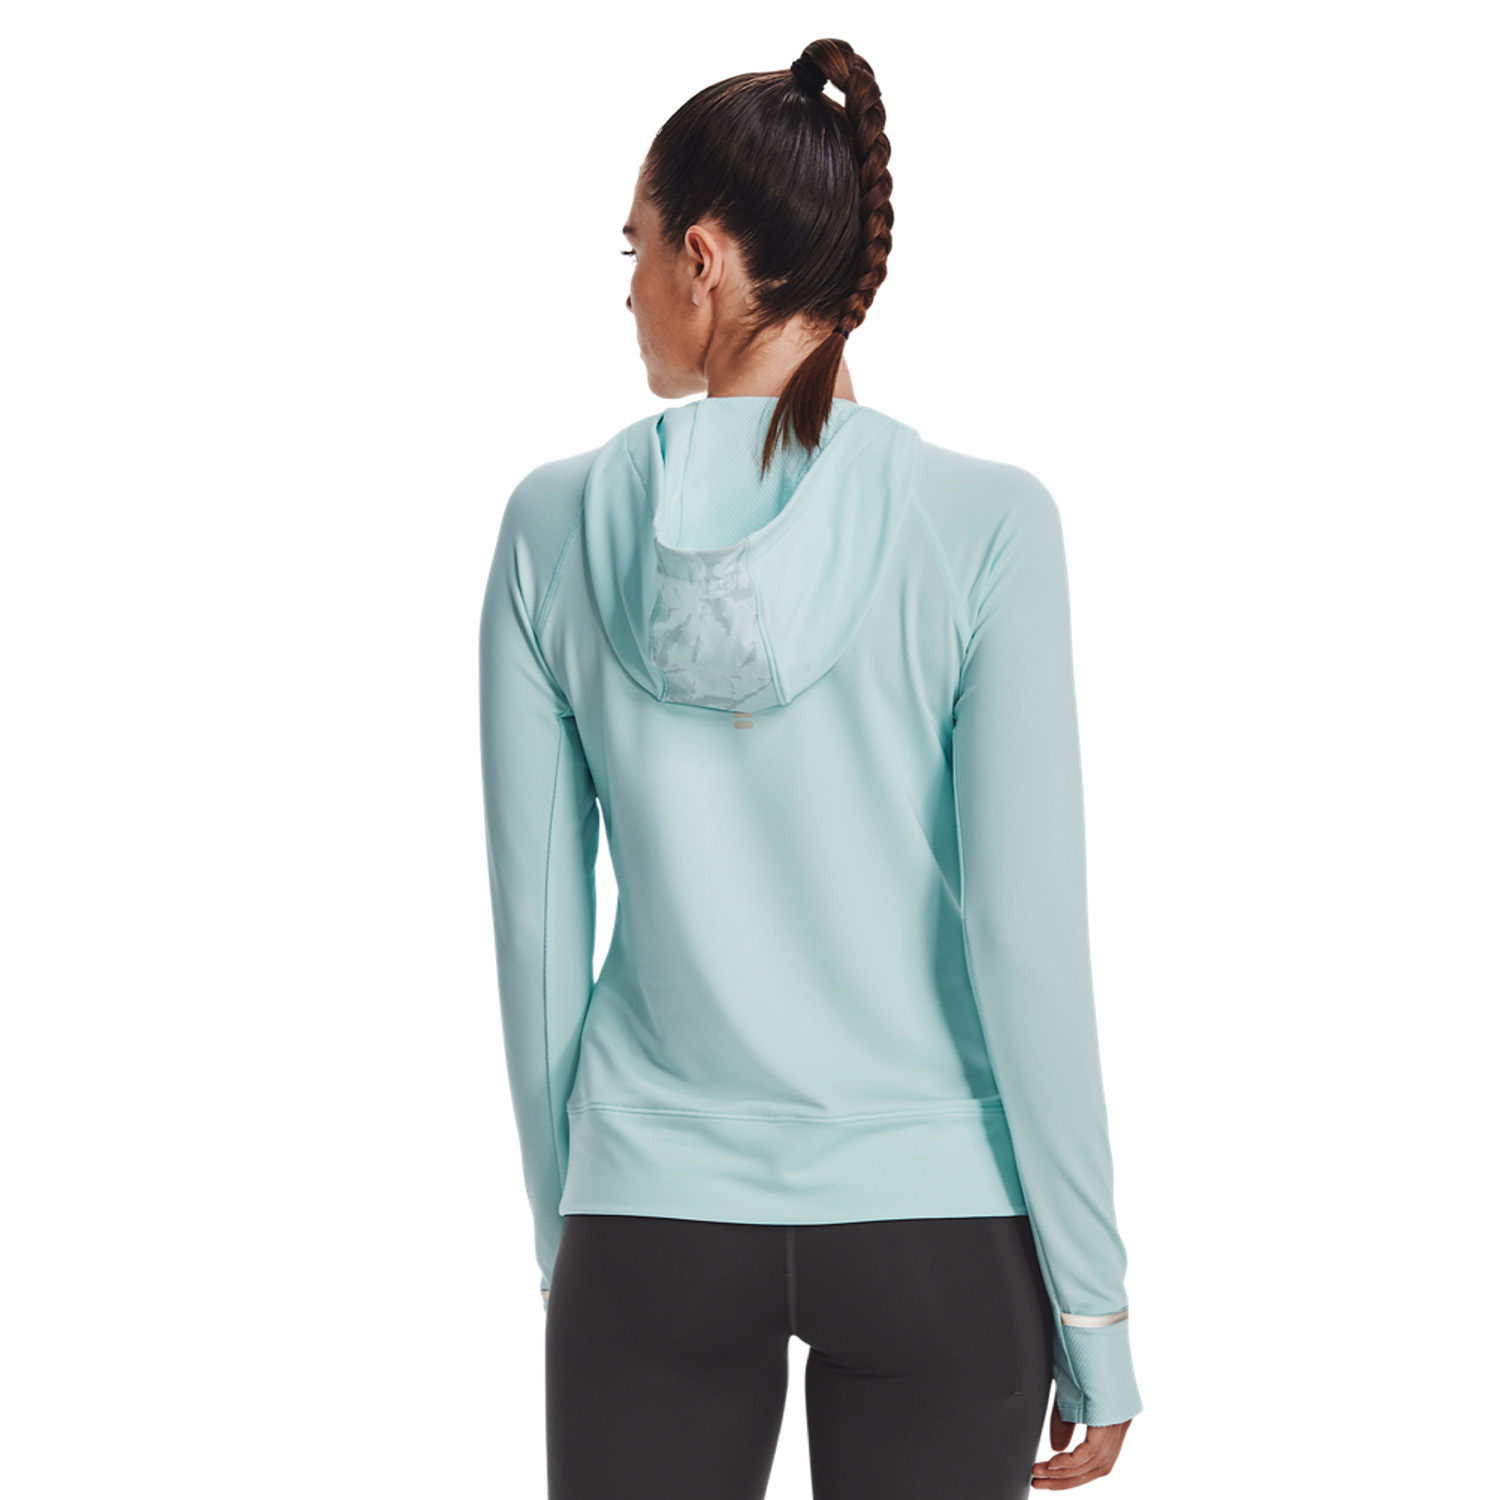 Under Armour Outrun The Cold Women's Running Shirt - Fuse Teal